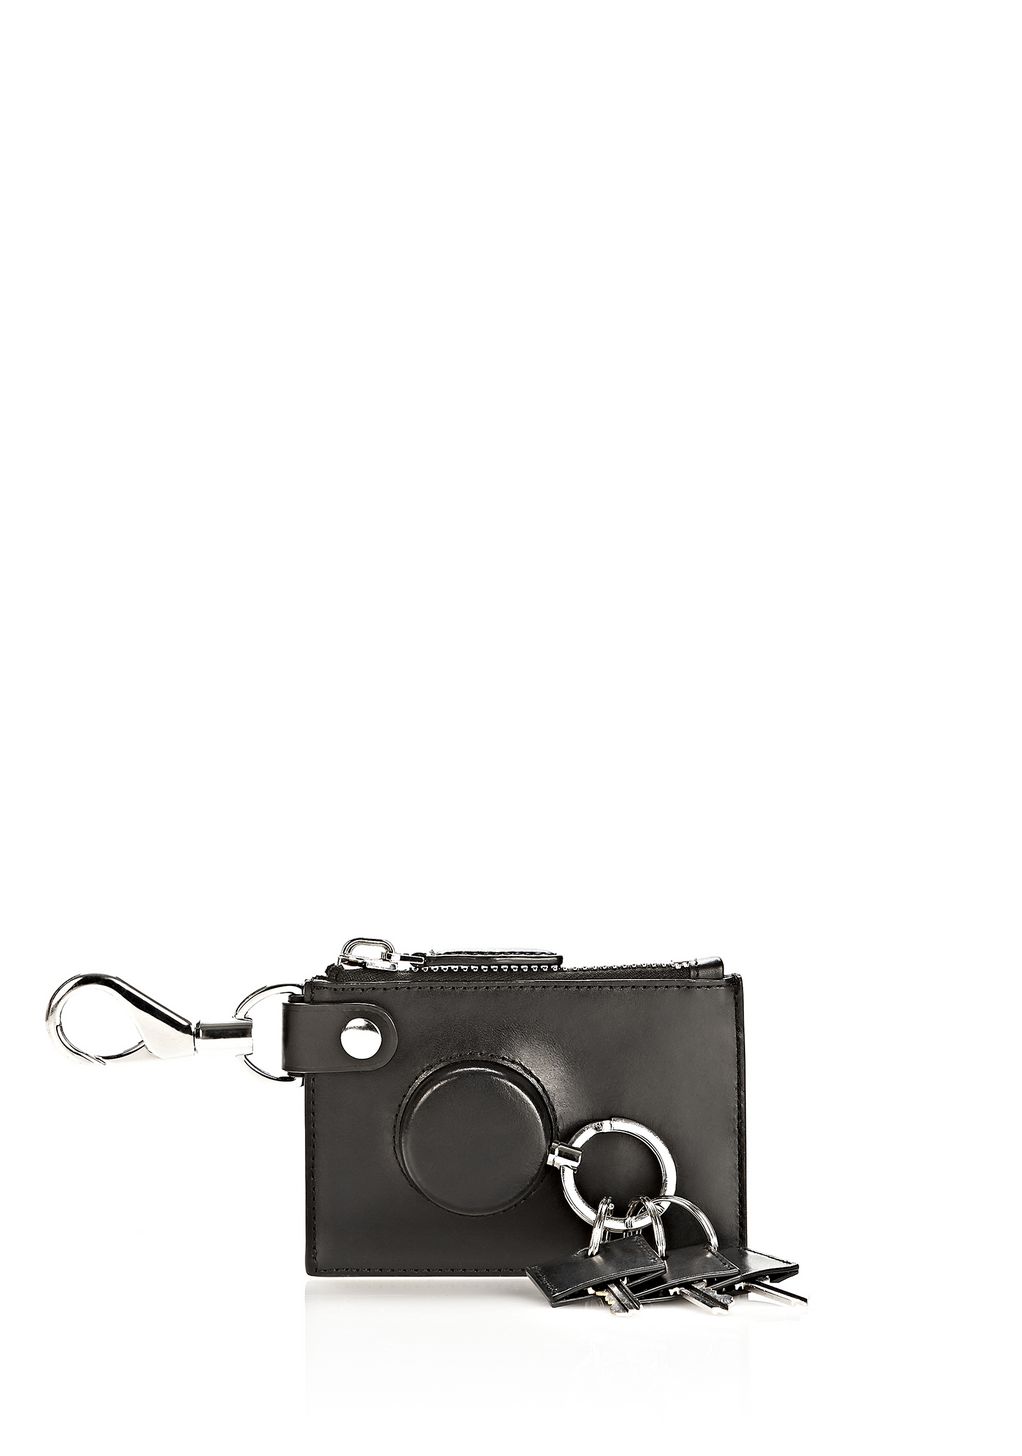 Alexander Wang ‎RUNWAY ZIP POUCH IN BLACK WITH RHODIUM ‎ ‎SMALL LEATHER ...